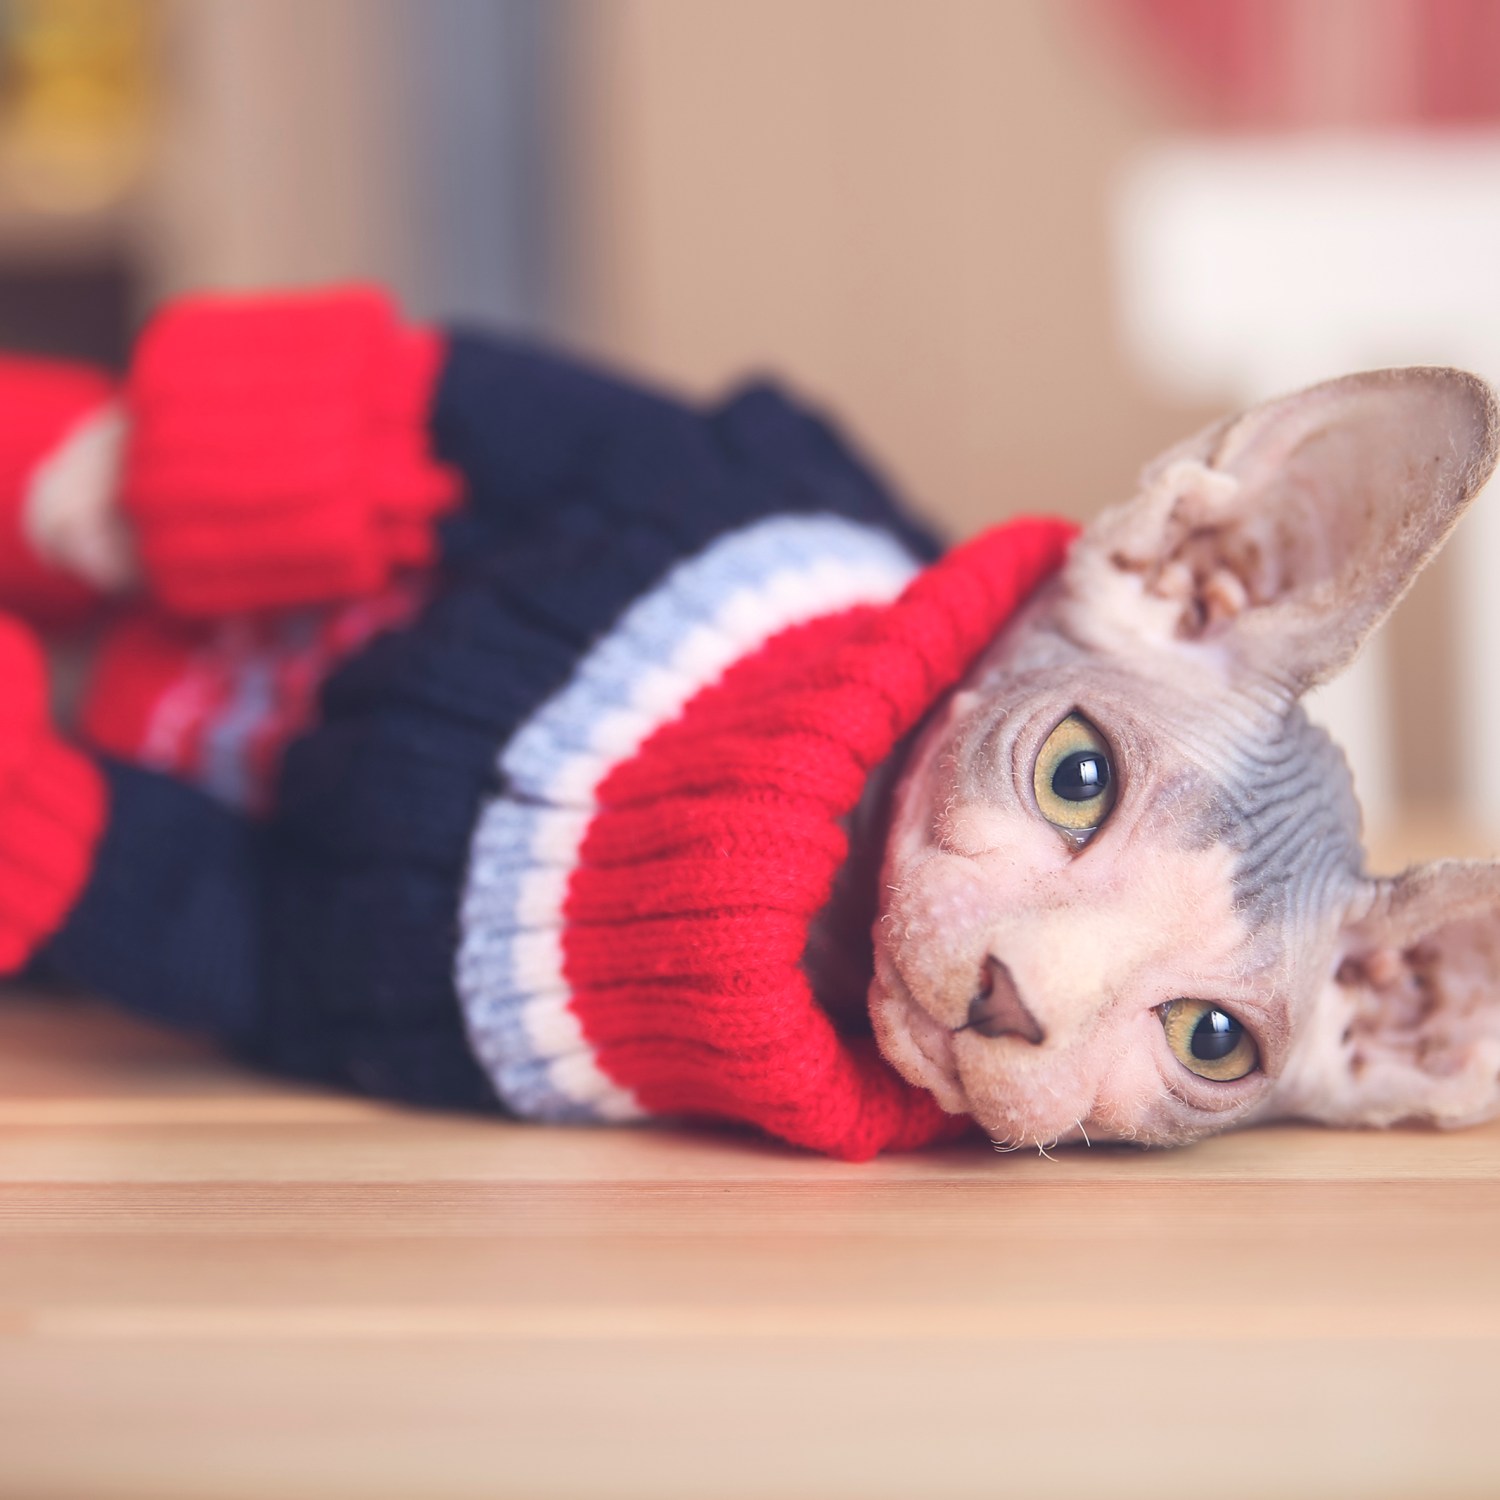 Hairless cat keeping warm in a red and blue sweater